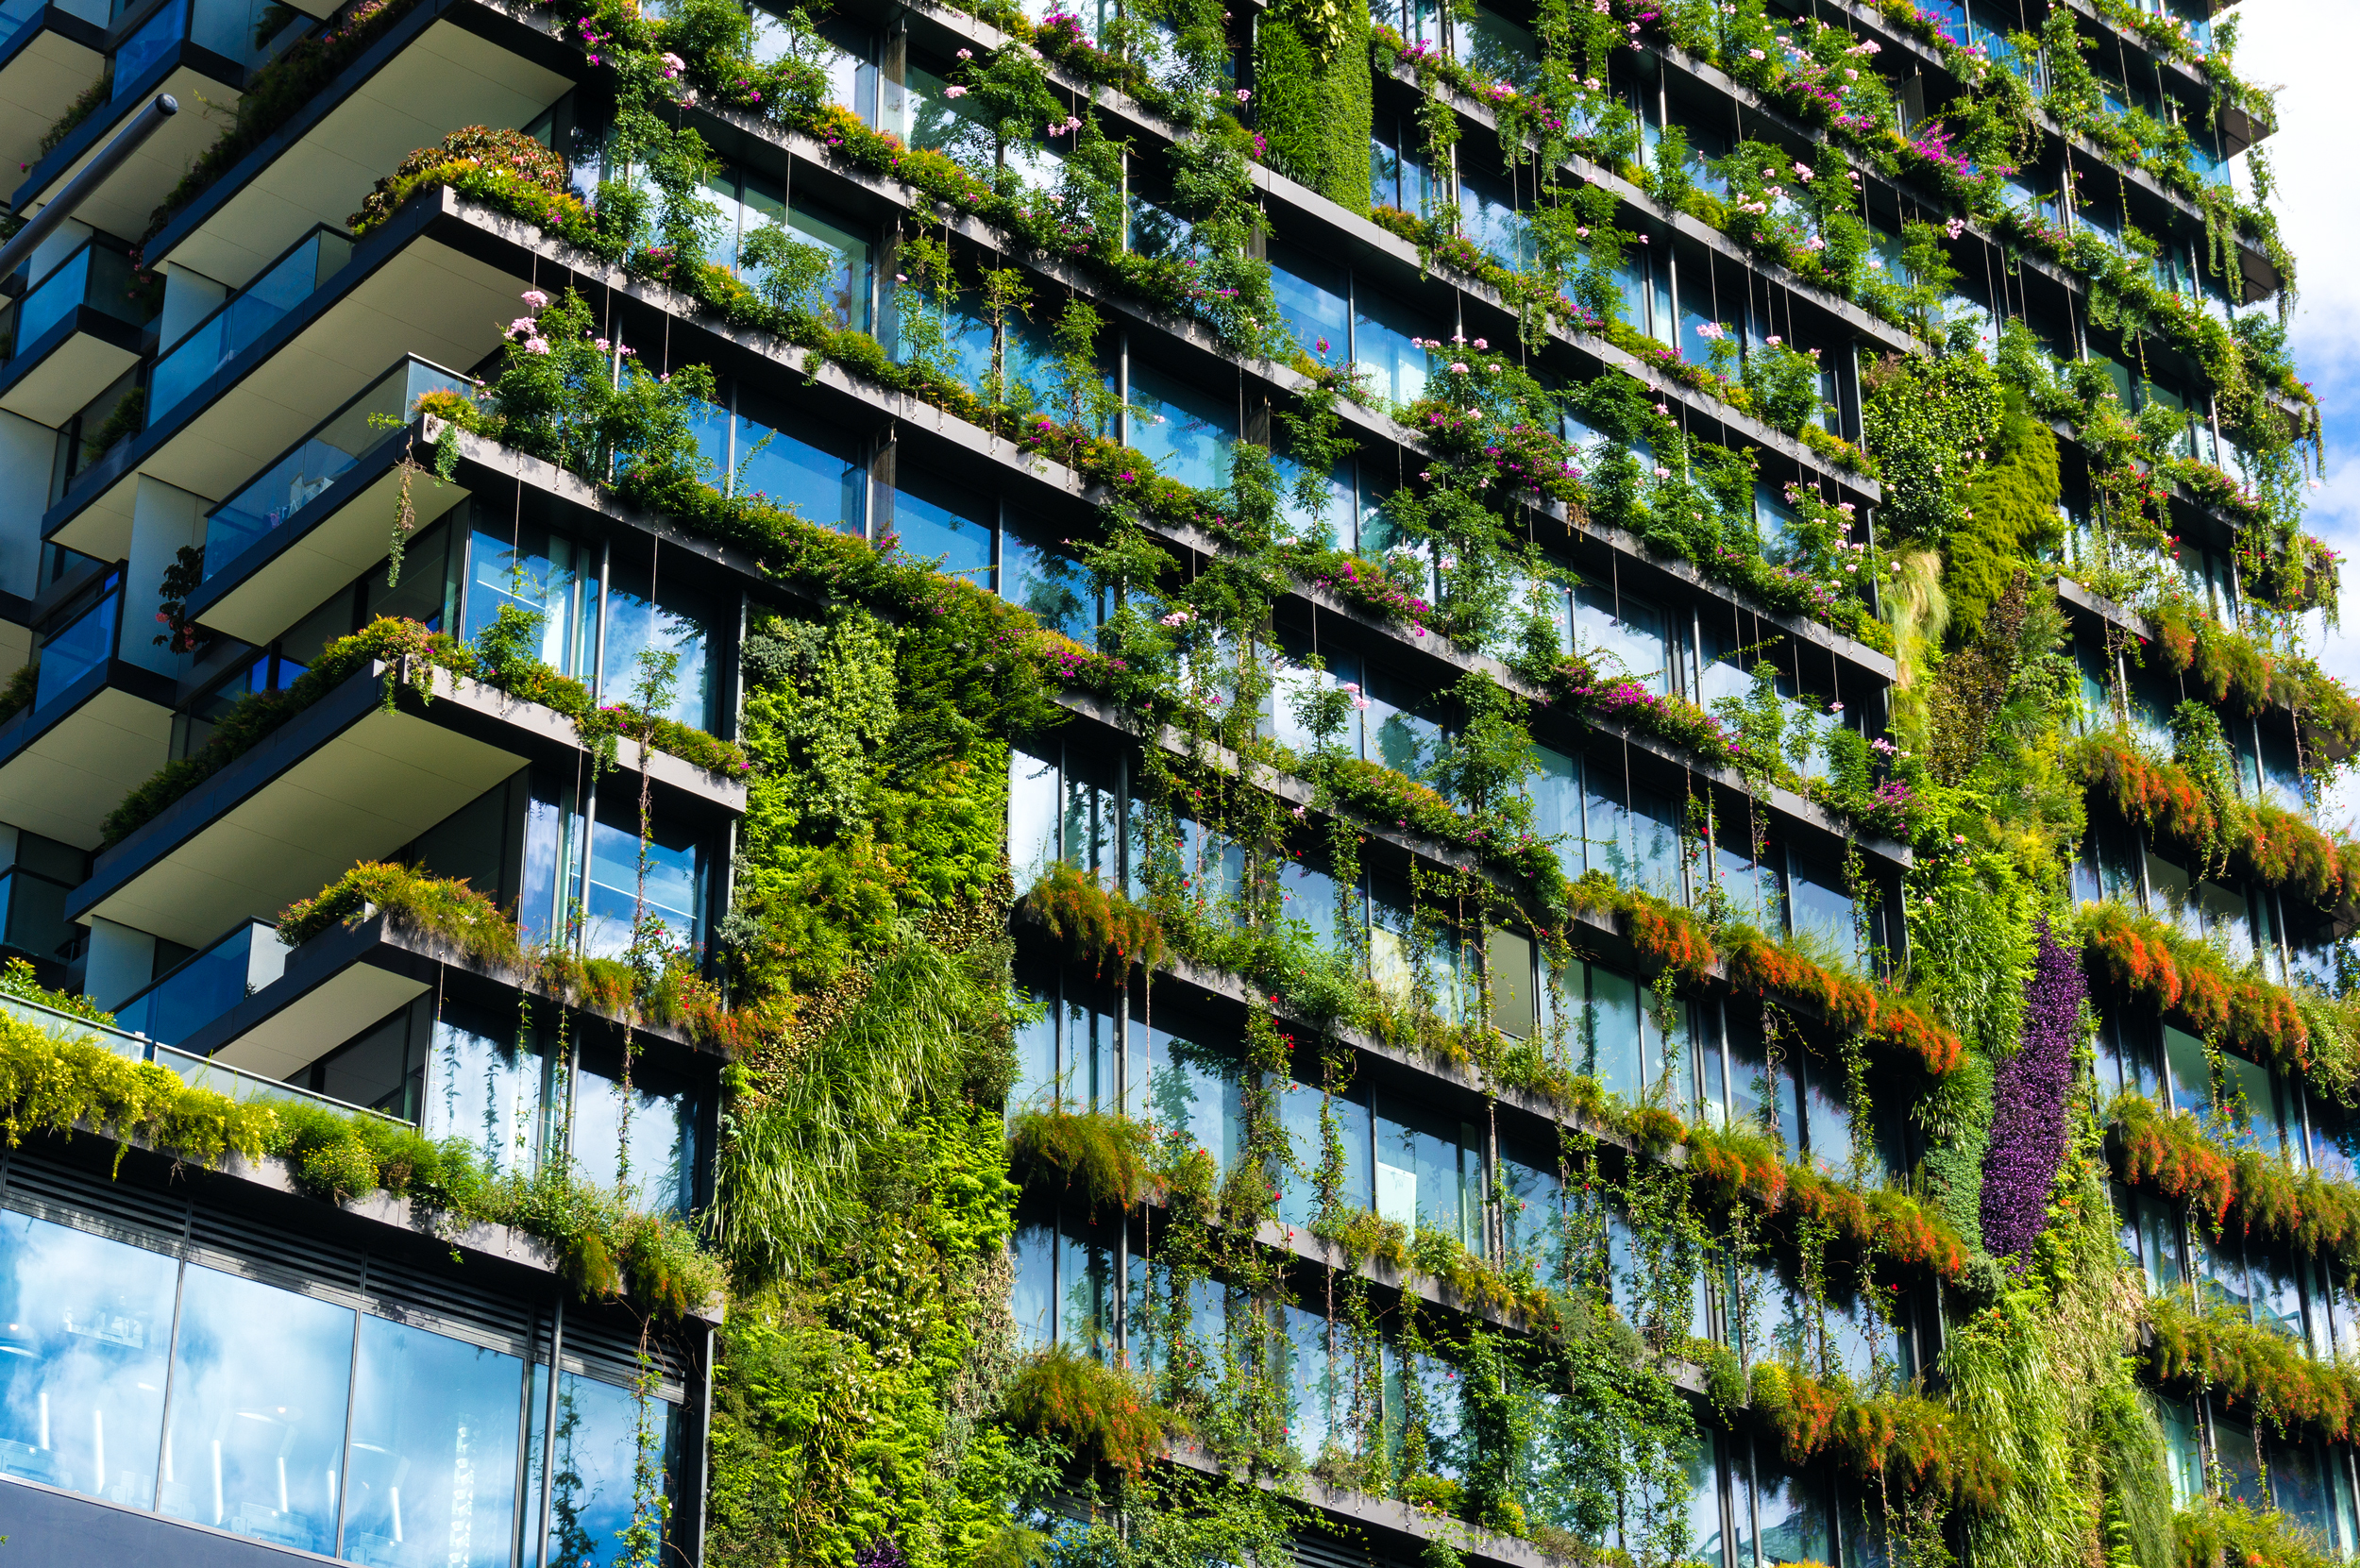 Inclusion of greenery and biodiversity is on the rise in new building and development planning